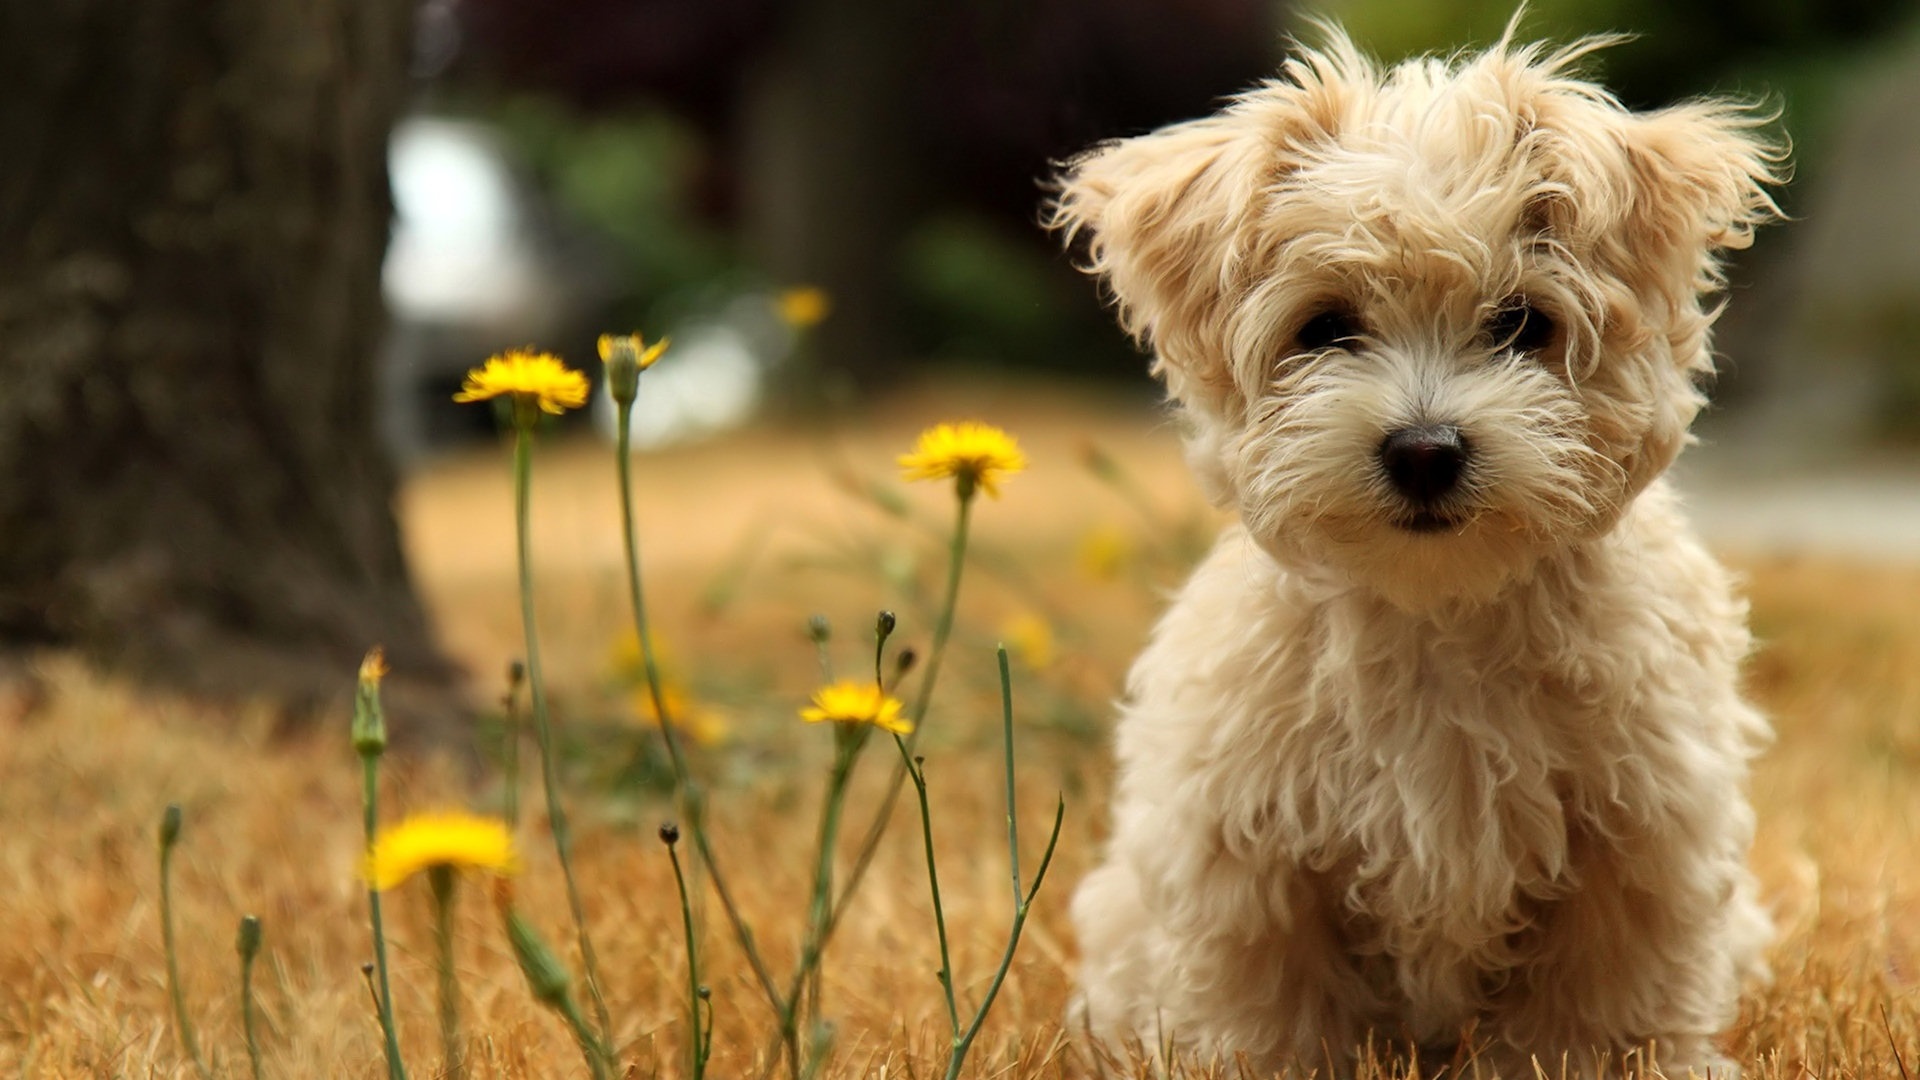 50 Free HD Dog Wallpapers